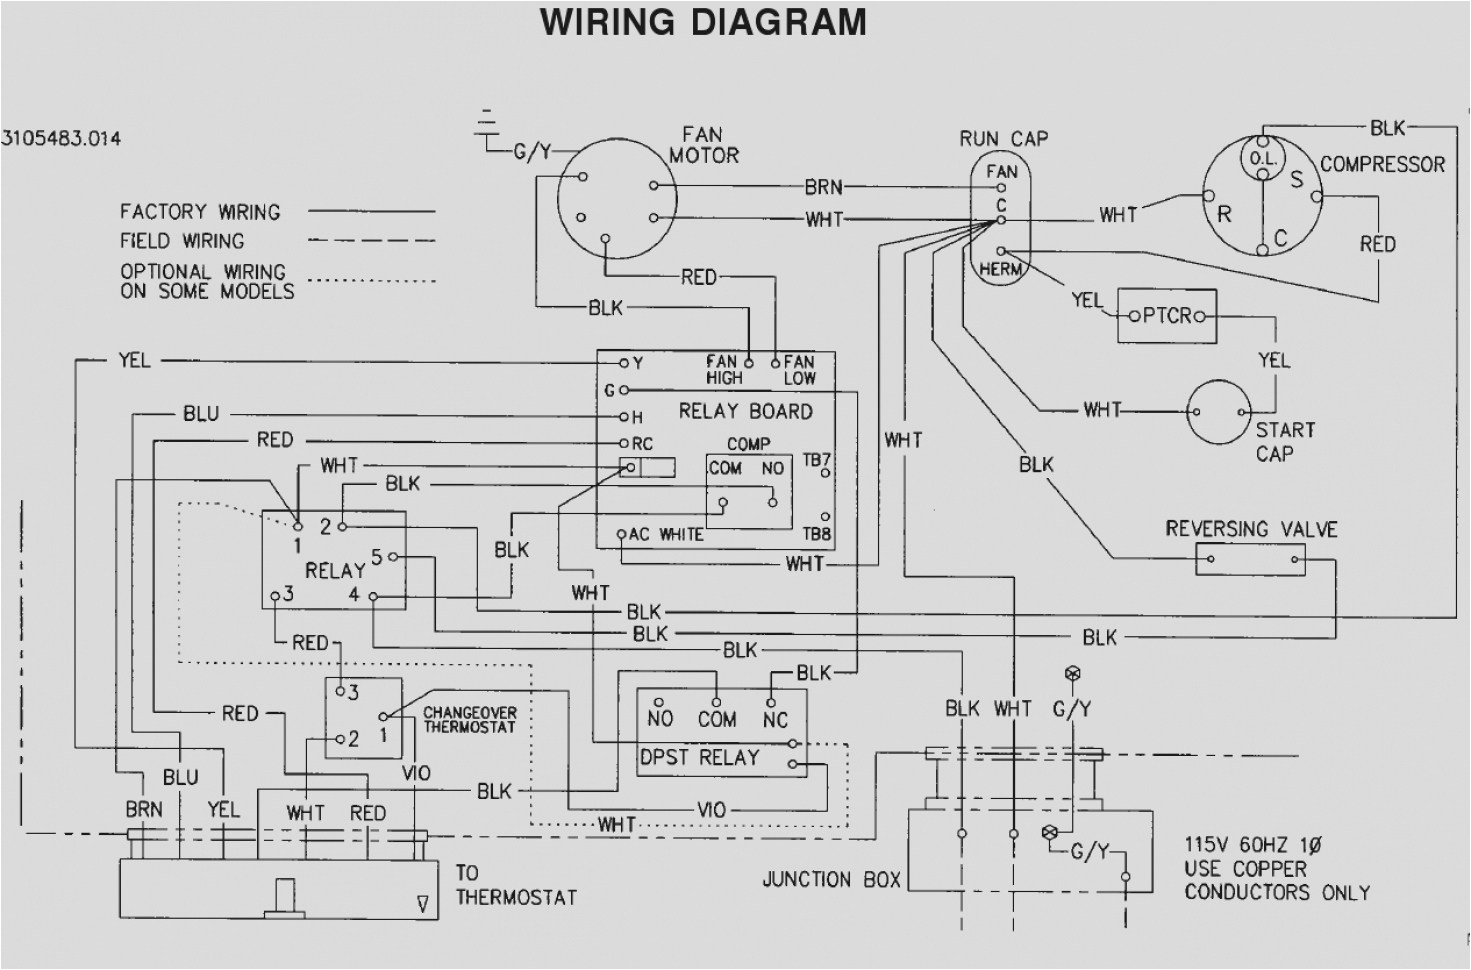 duo therm rv air conditioner wiring diagram duo therm wiring diagram duo therm thermostat wiring diagram unique new dometic duo therm thermostat 14j jpg